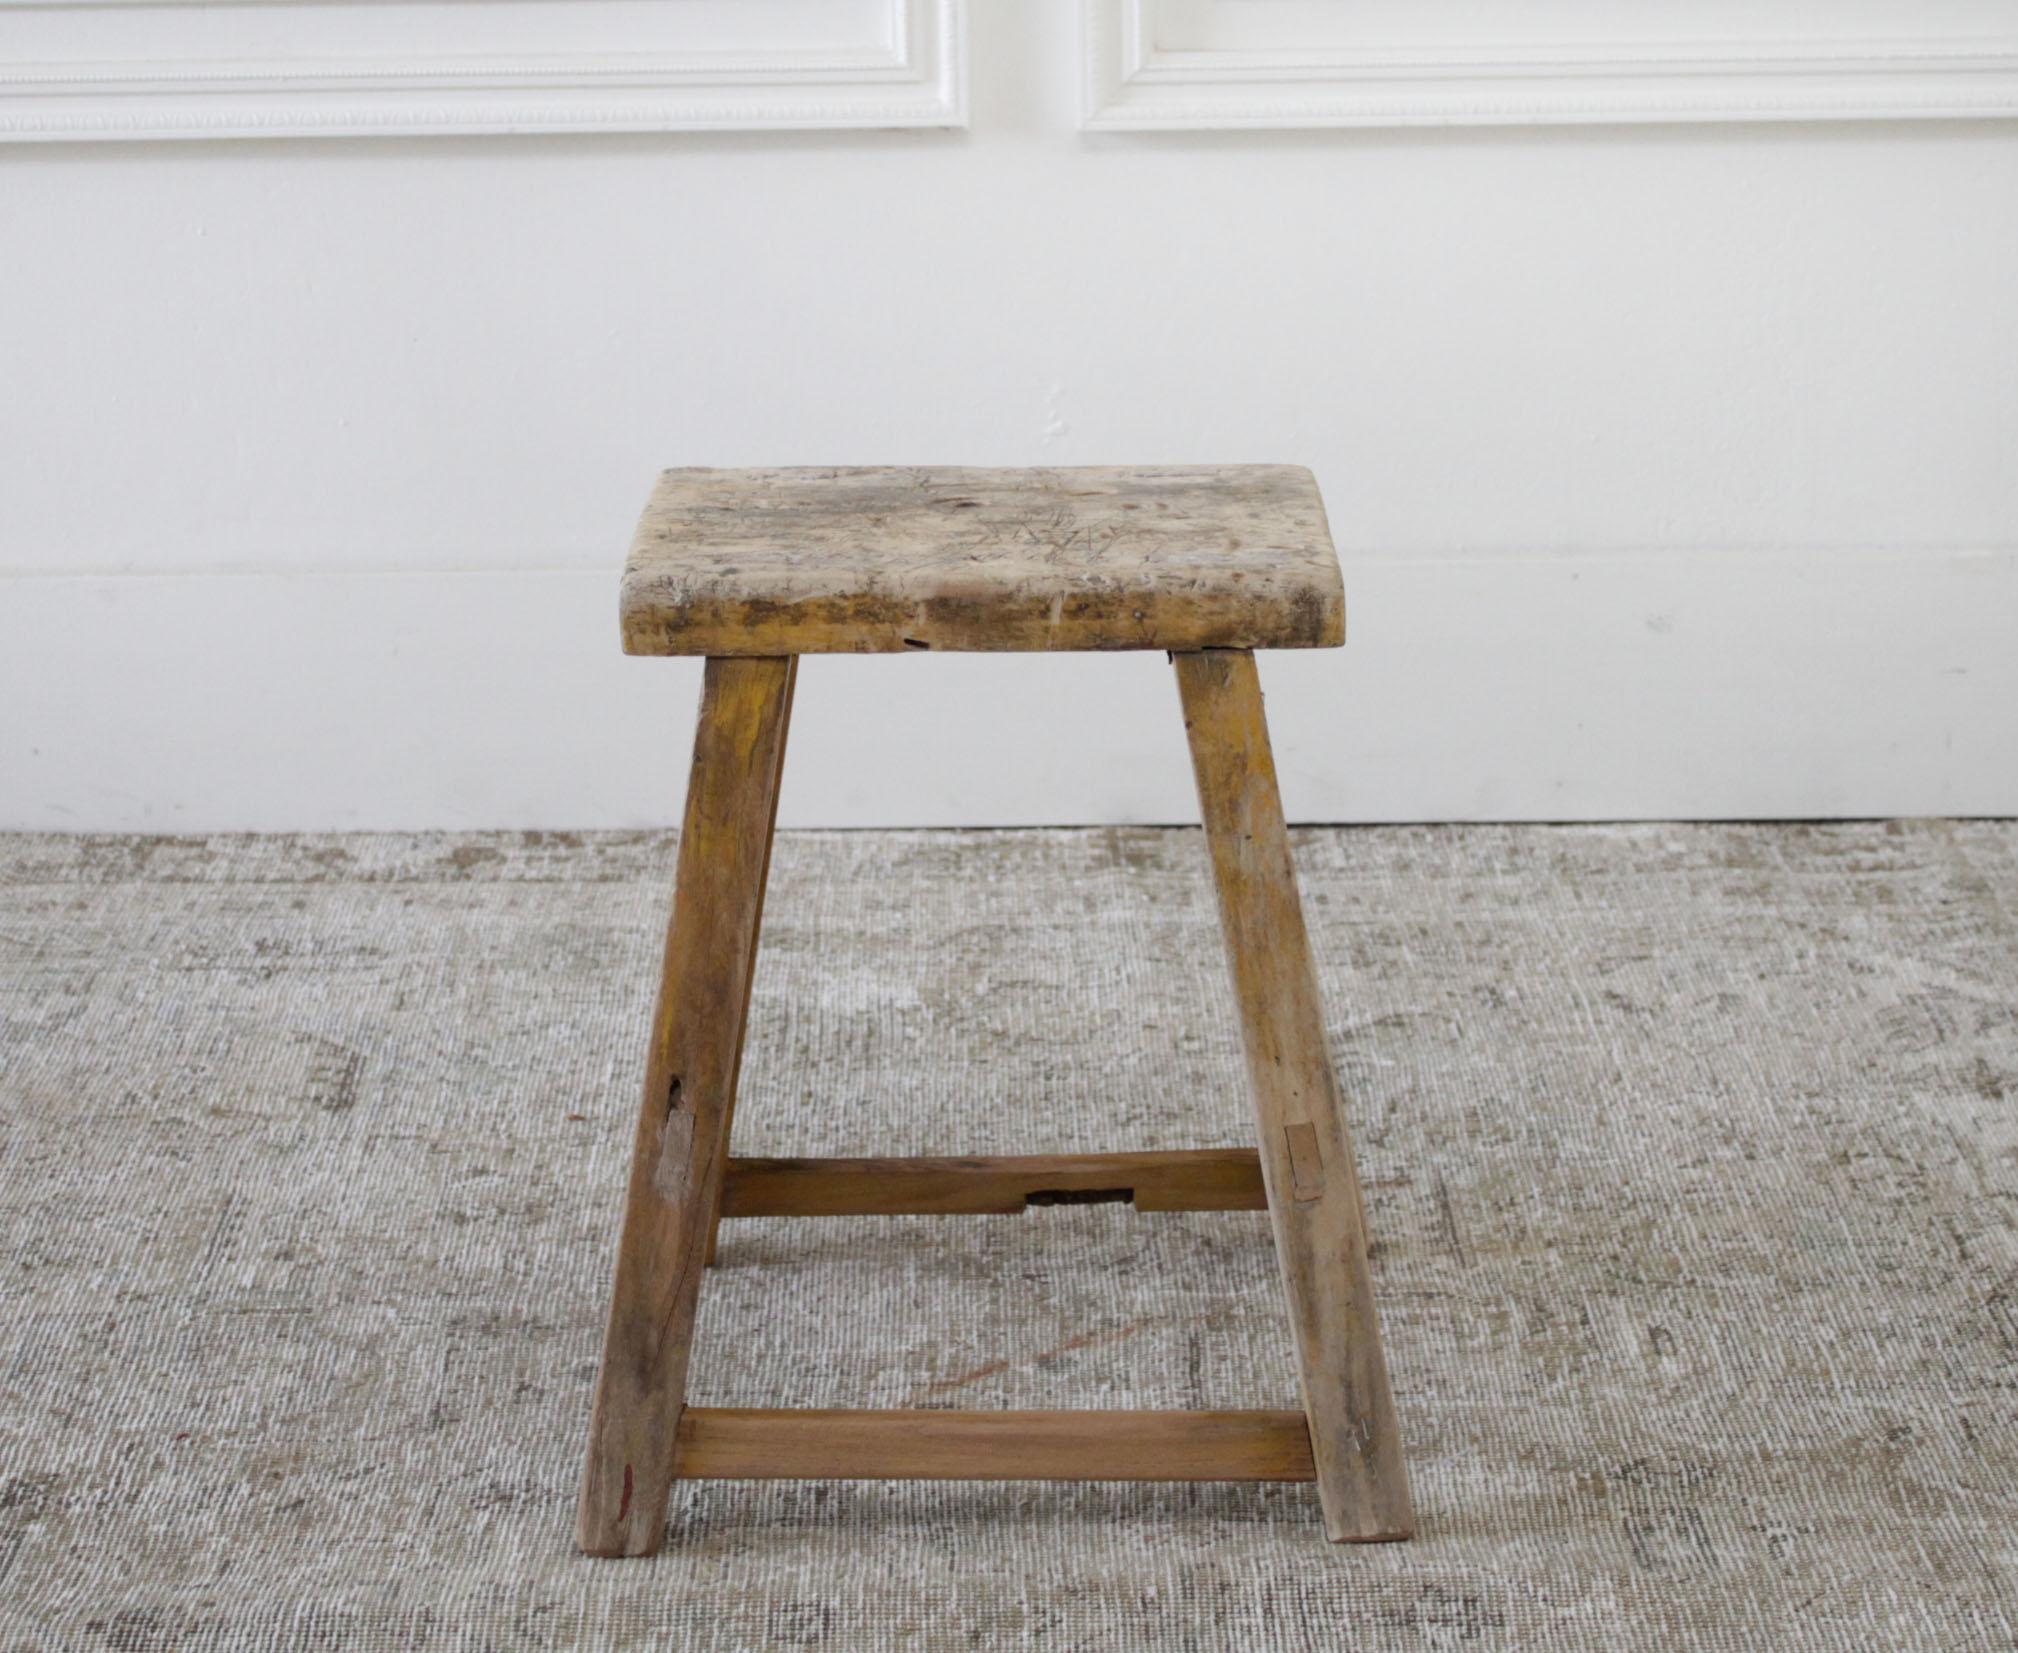 These are the real vintage antique elm wood stools! Beautiful antique patina, with weathering and age, these are solid and sturdy ready for daily use, use as a table, stool, drink table, they are great for any space.
Size: 15.5